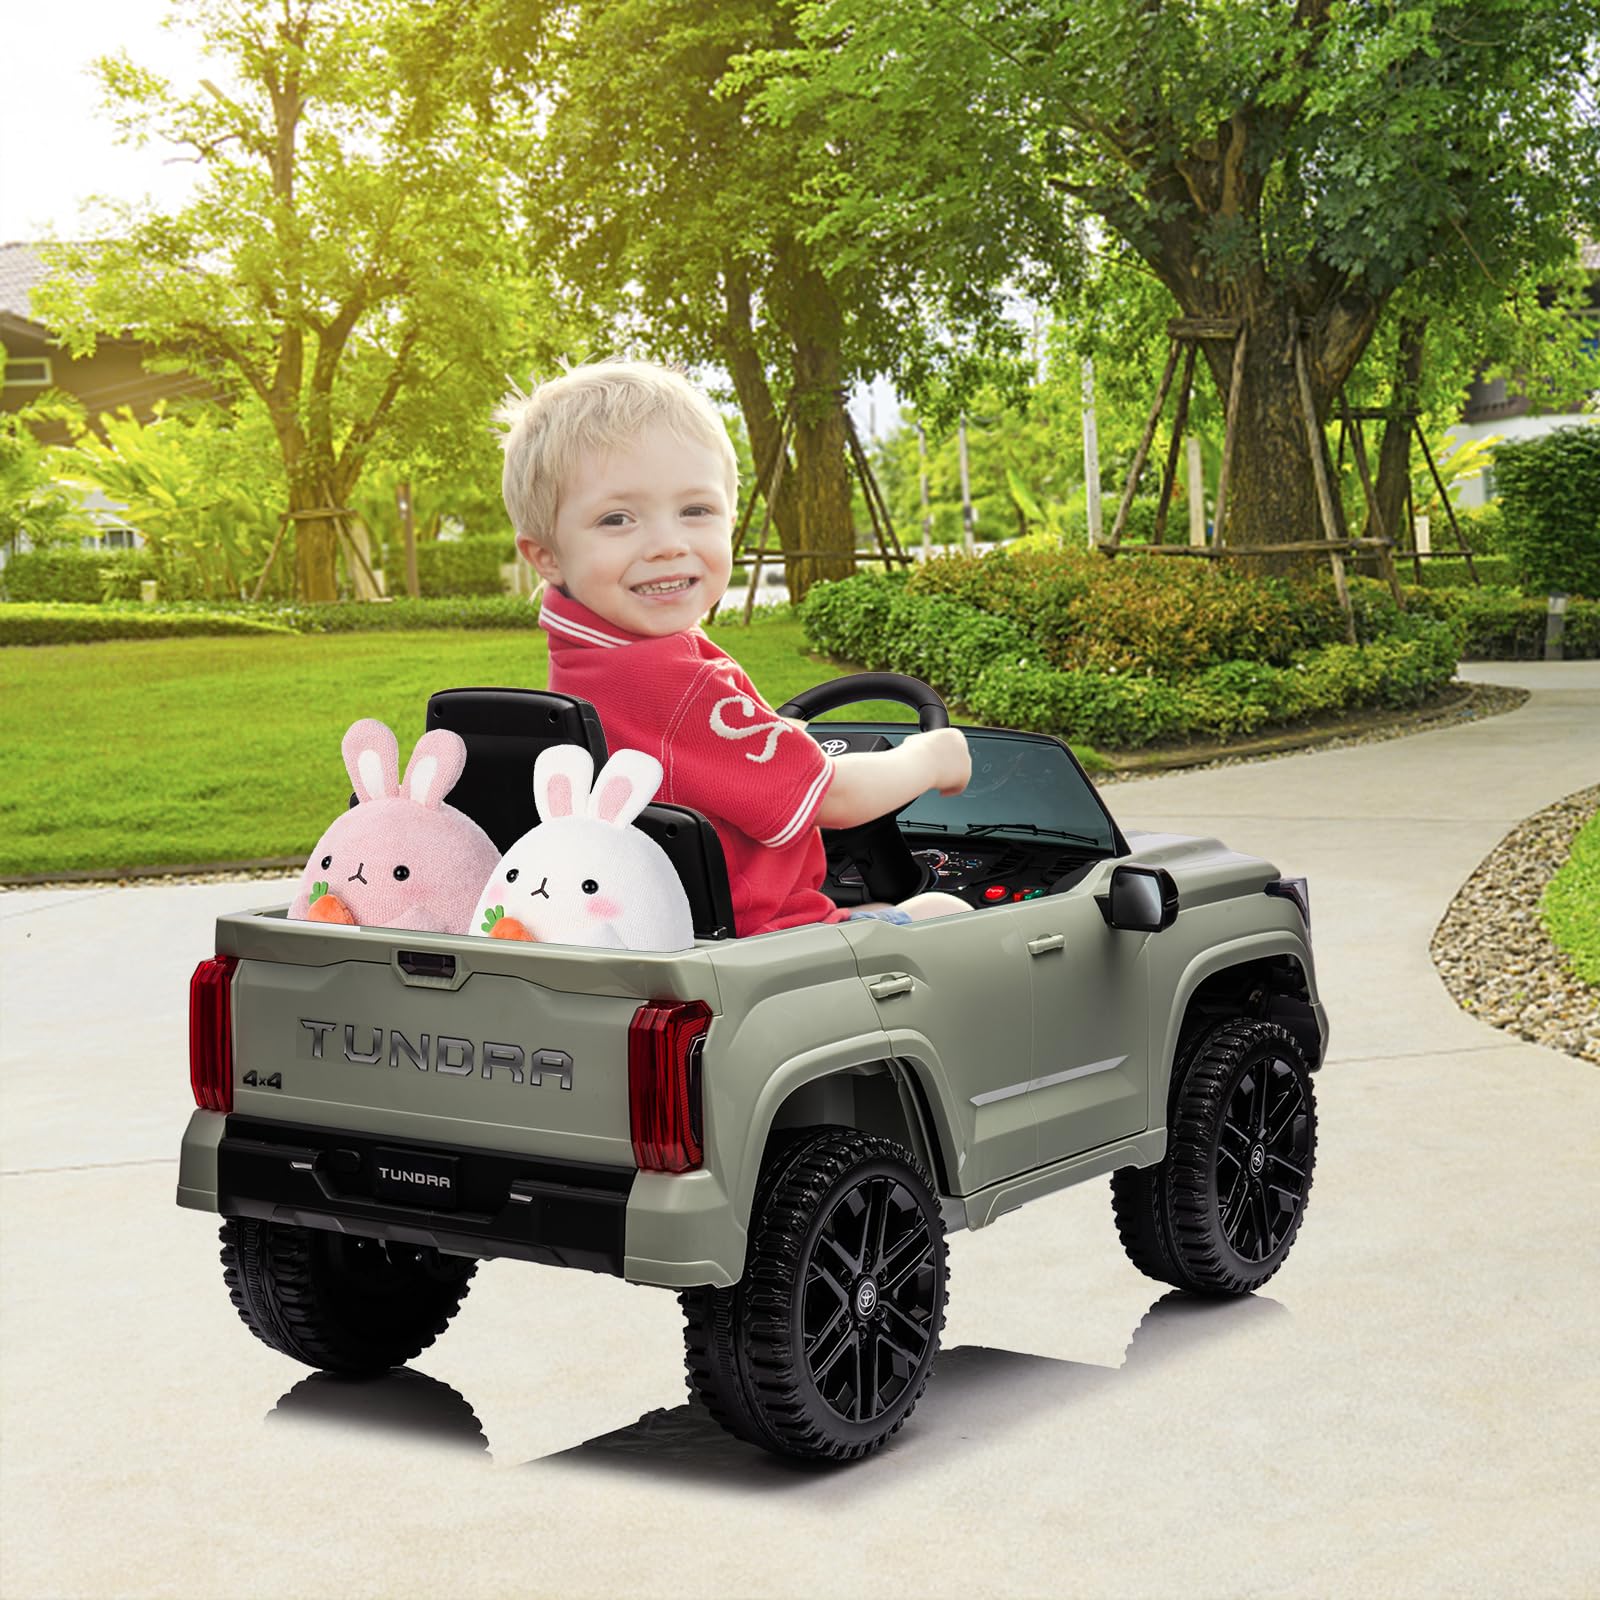 GARVEE 12V Ride on Car for Kids, Licensed Toyota Ride on Truck, Battery Powered Electric Car with Remote Control, MP3, LED Lights, Suspension System, Double Doors, Safety Belt, Ride On Toys for Boys Girls - Green